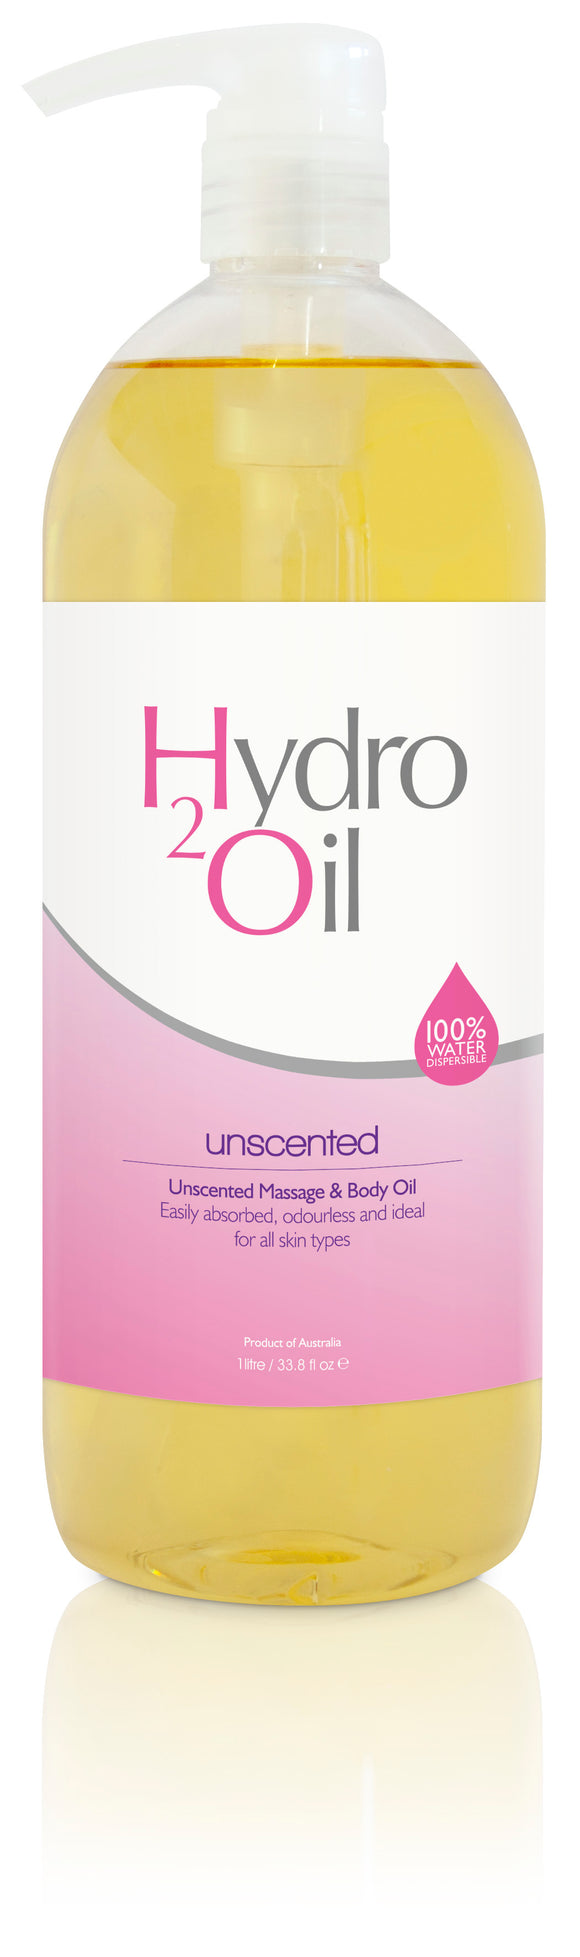 Caron Hydro2 Oil Unscented - 1ltr